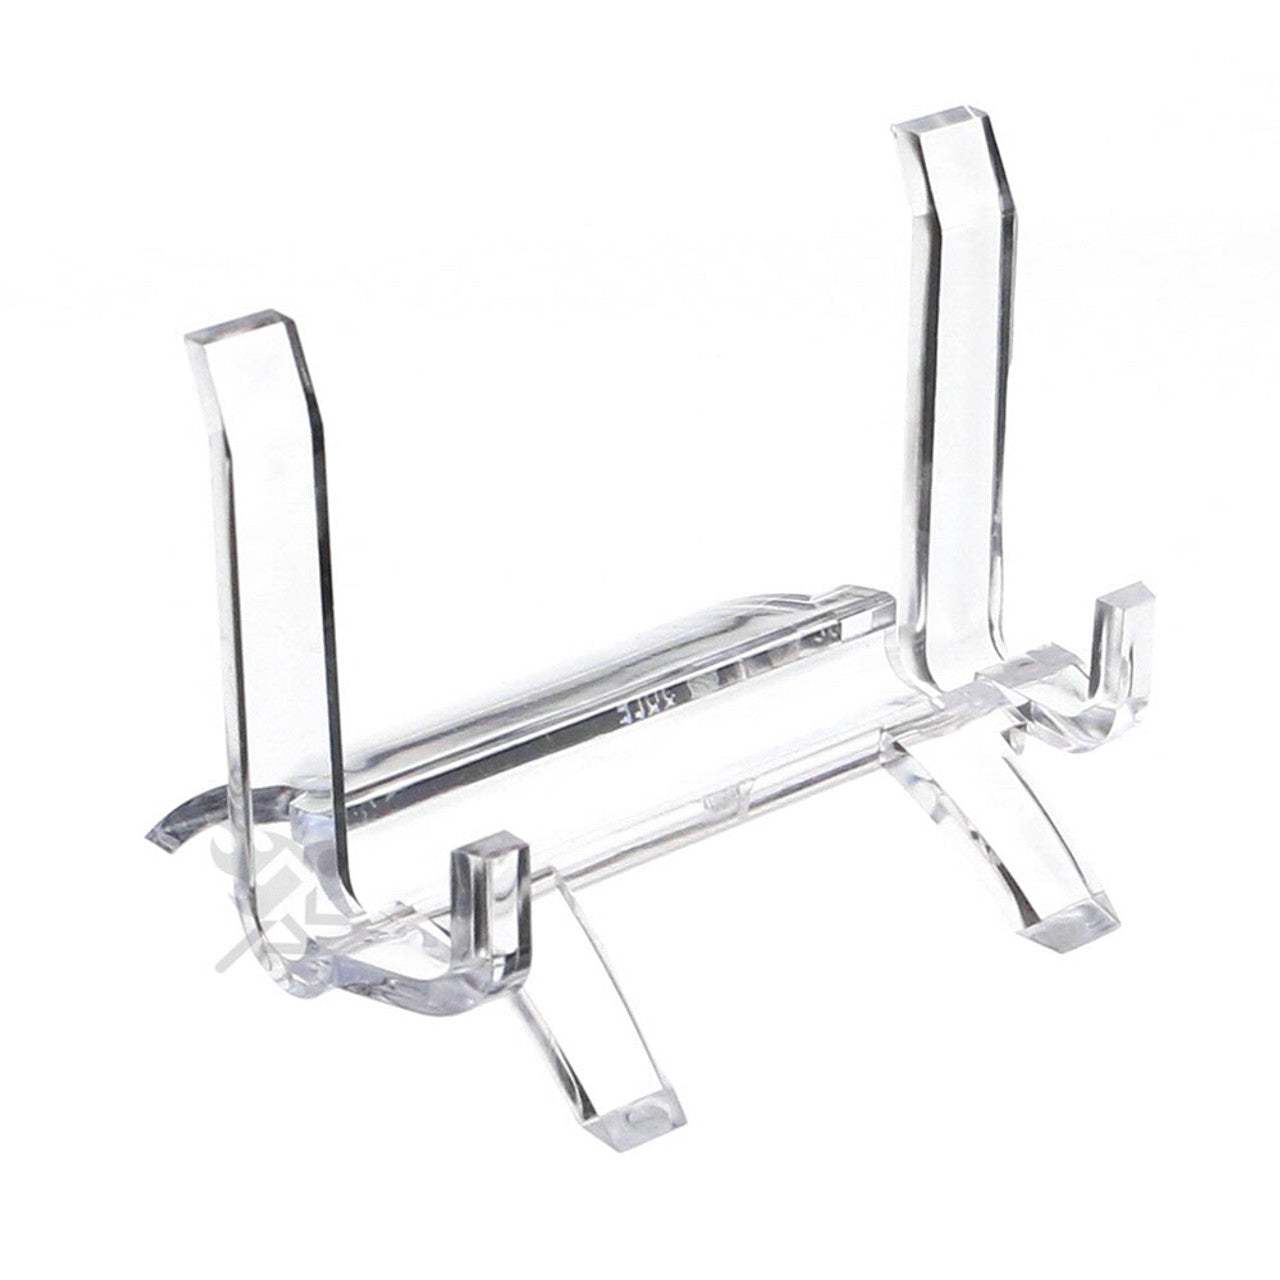 2.25 Clear Acrylic Display Stand Easels, 12 Pack